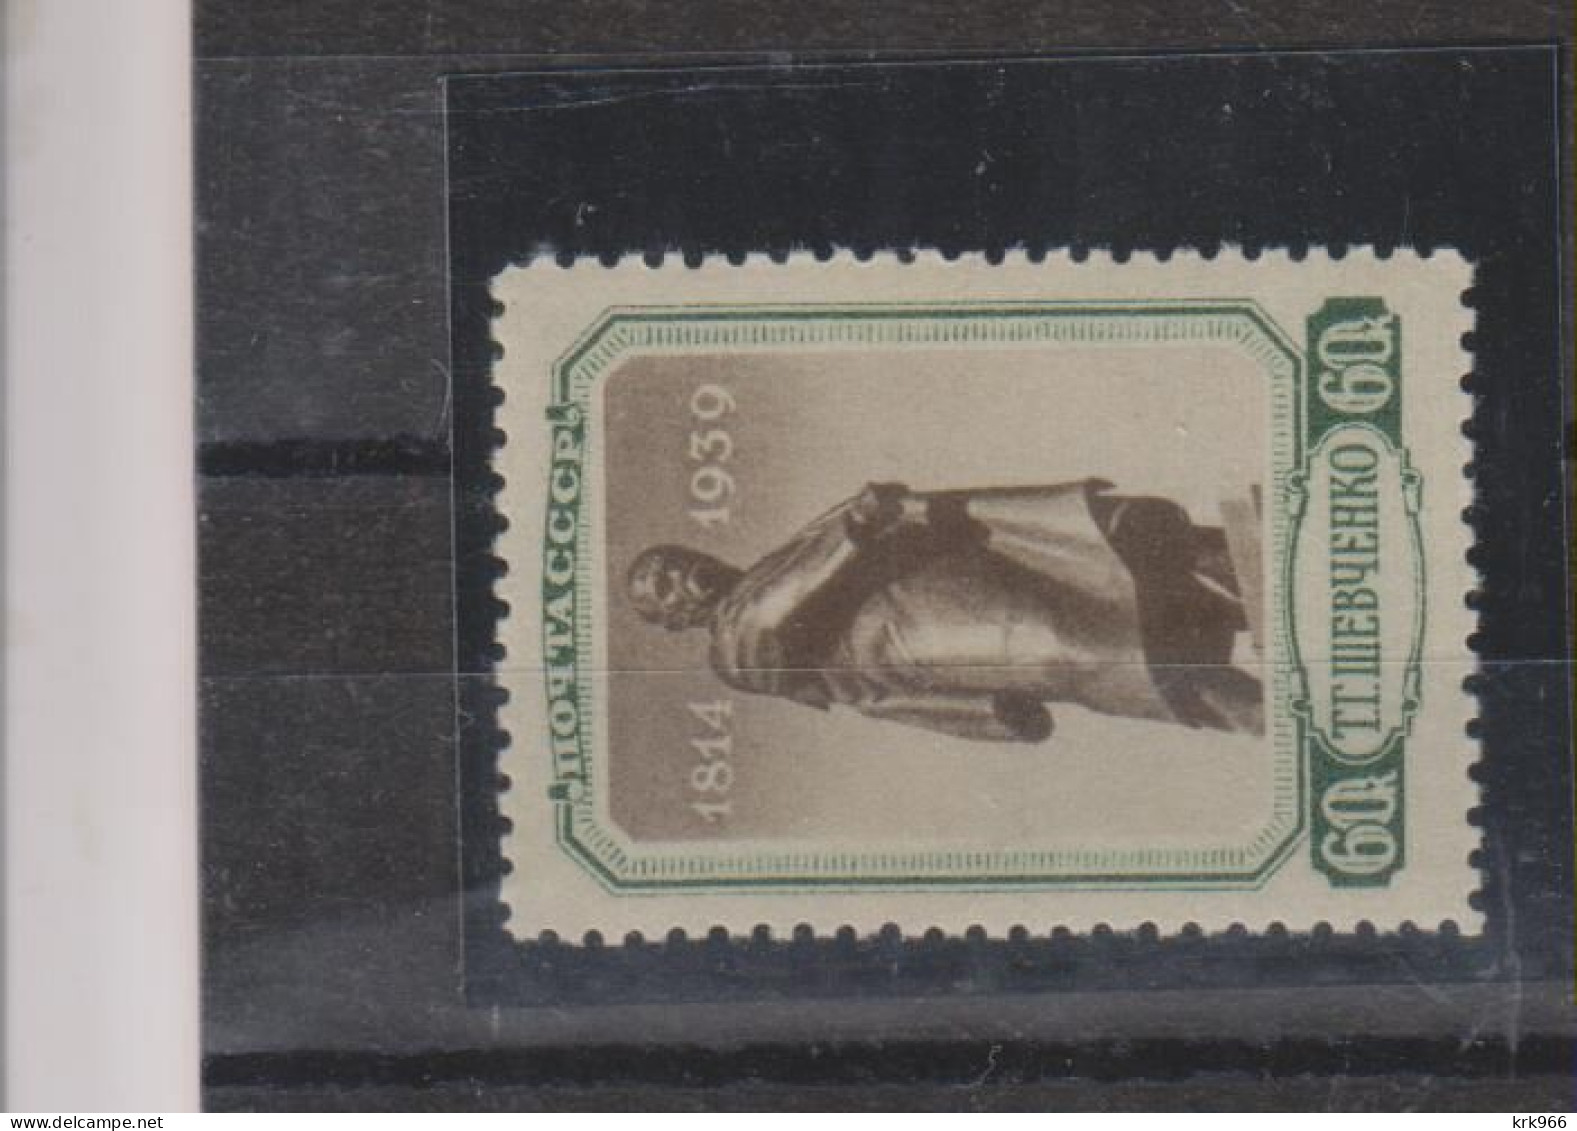 RUSSIA 1939 60 K Nice Stamp   MNH - Unused Stamps